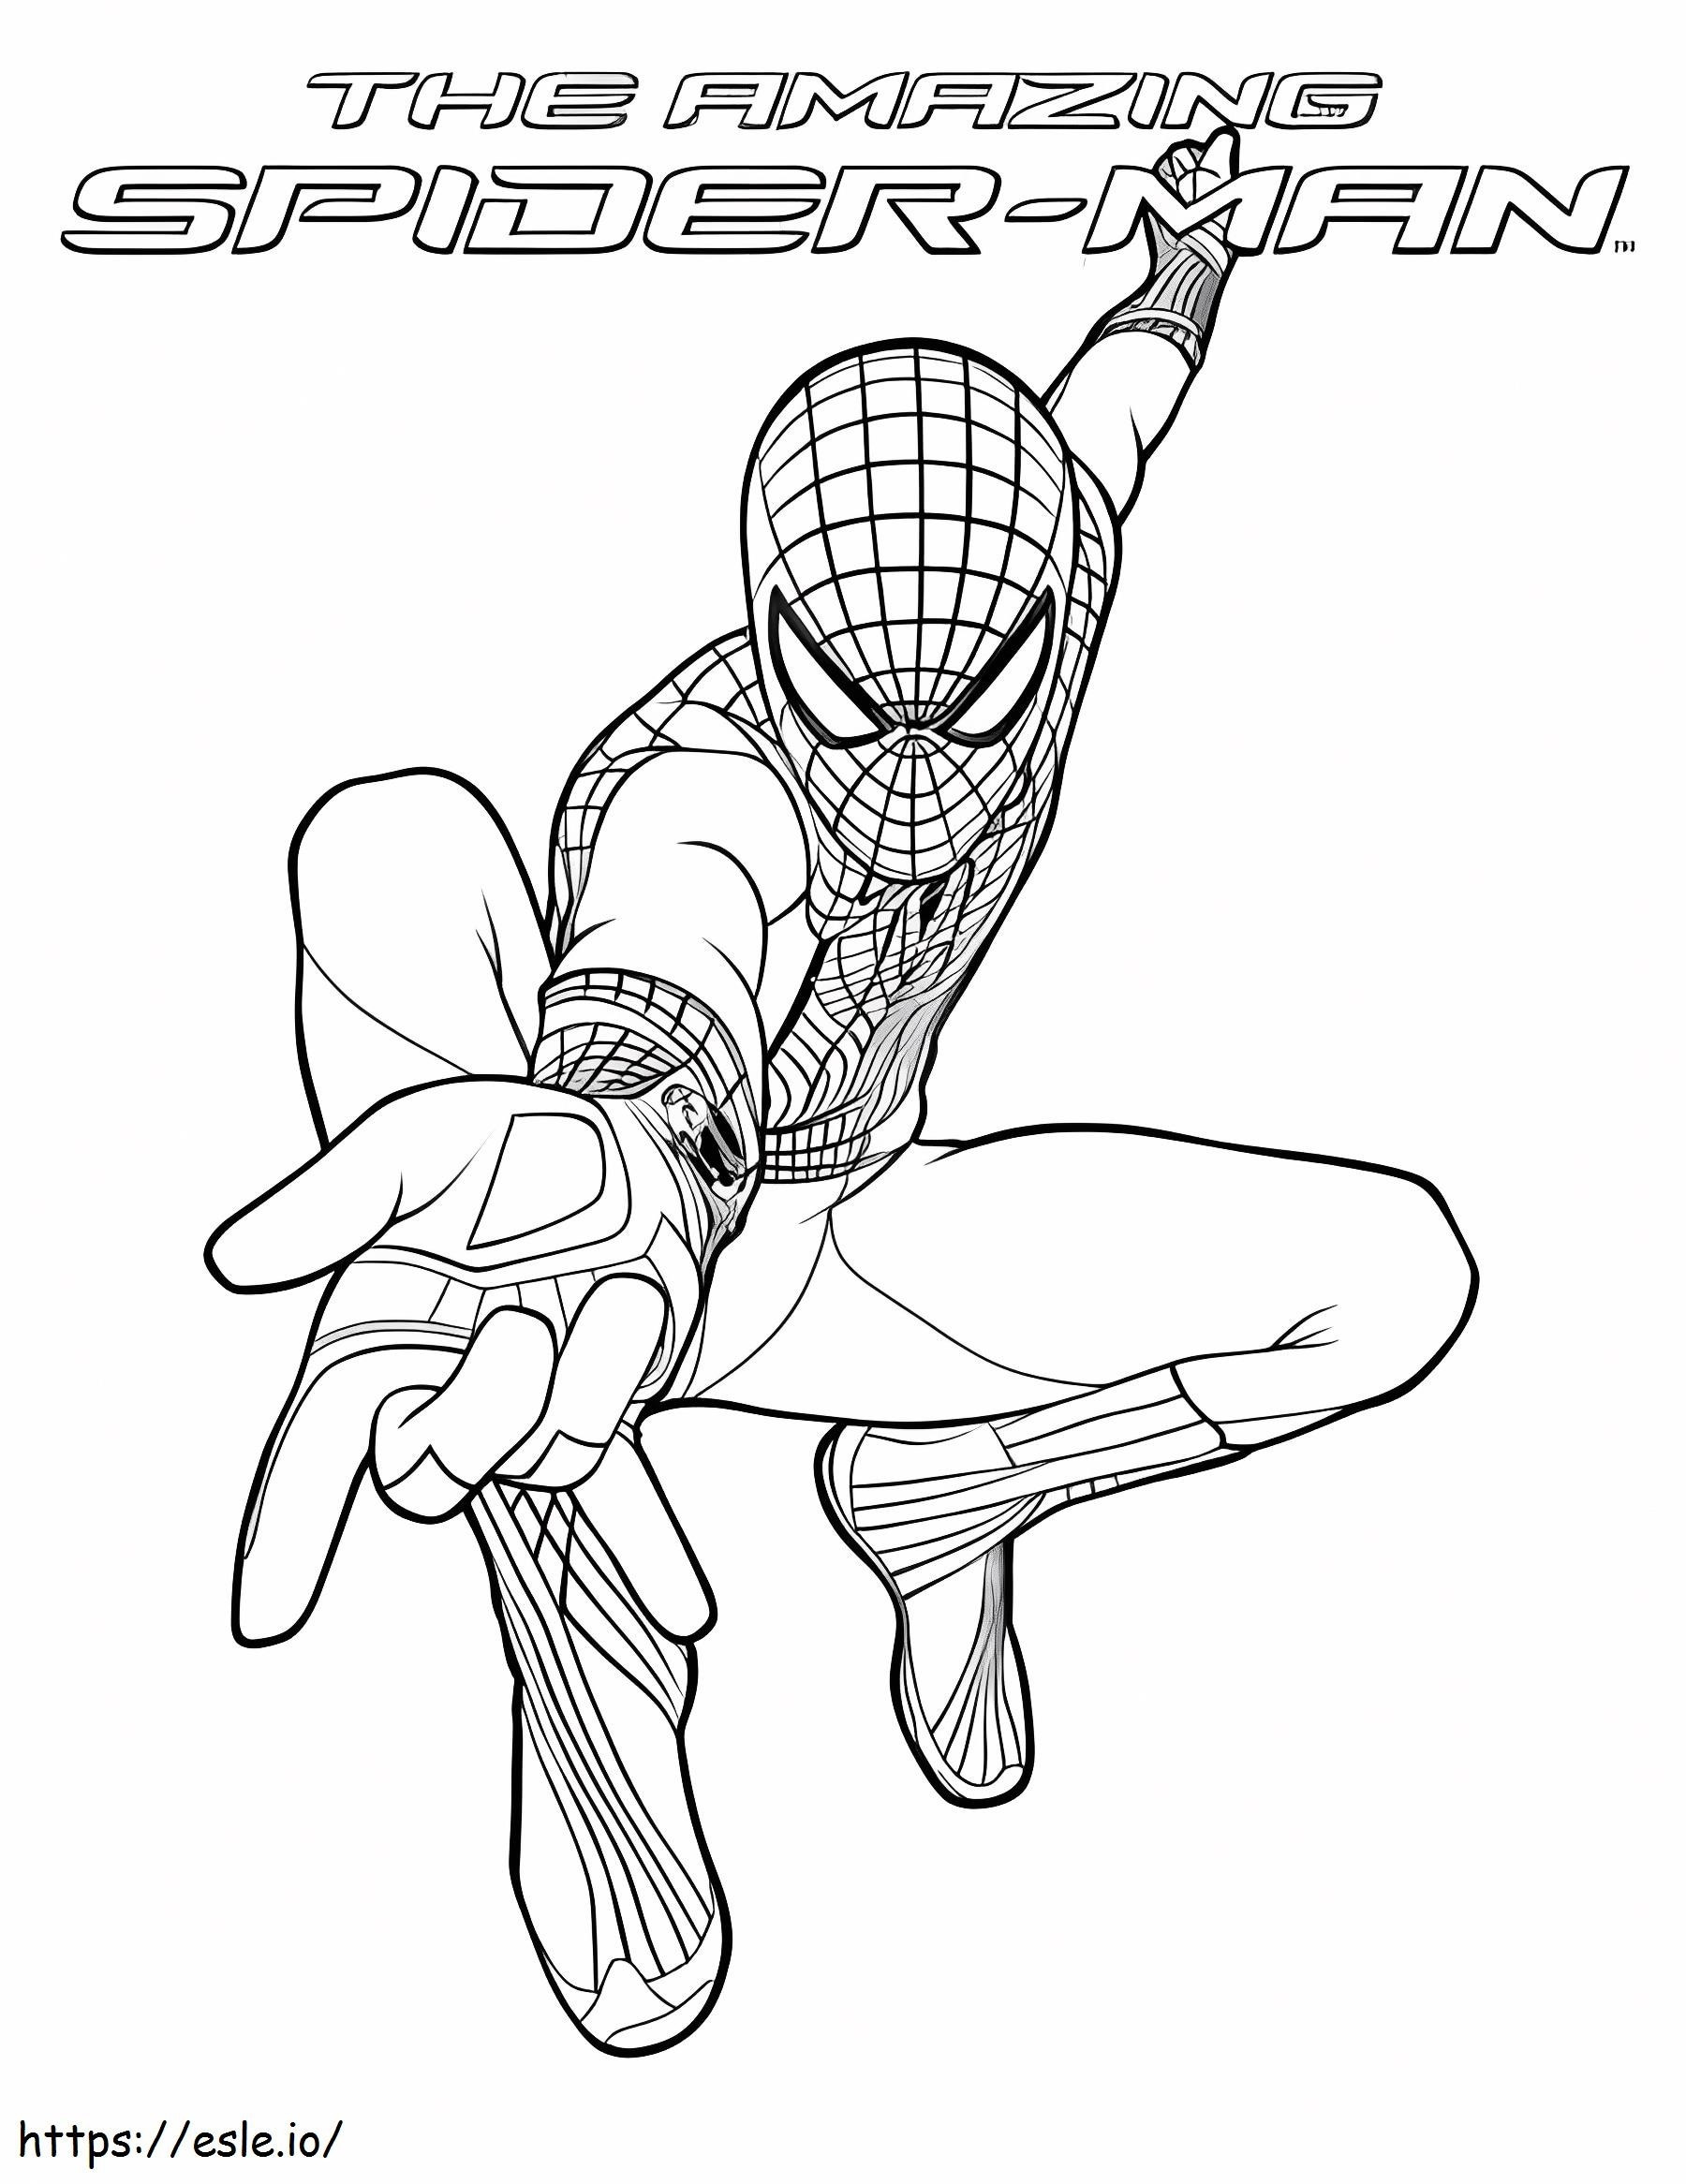 The Amazing Spiderman coloring page